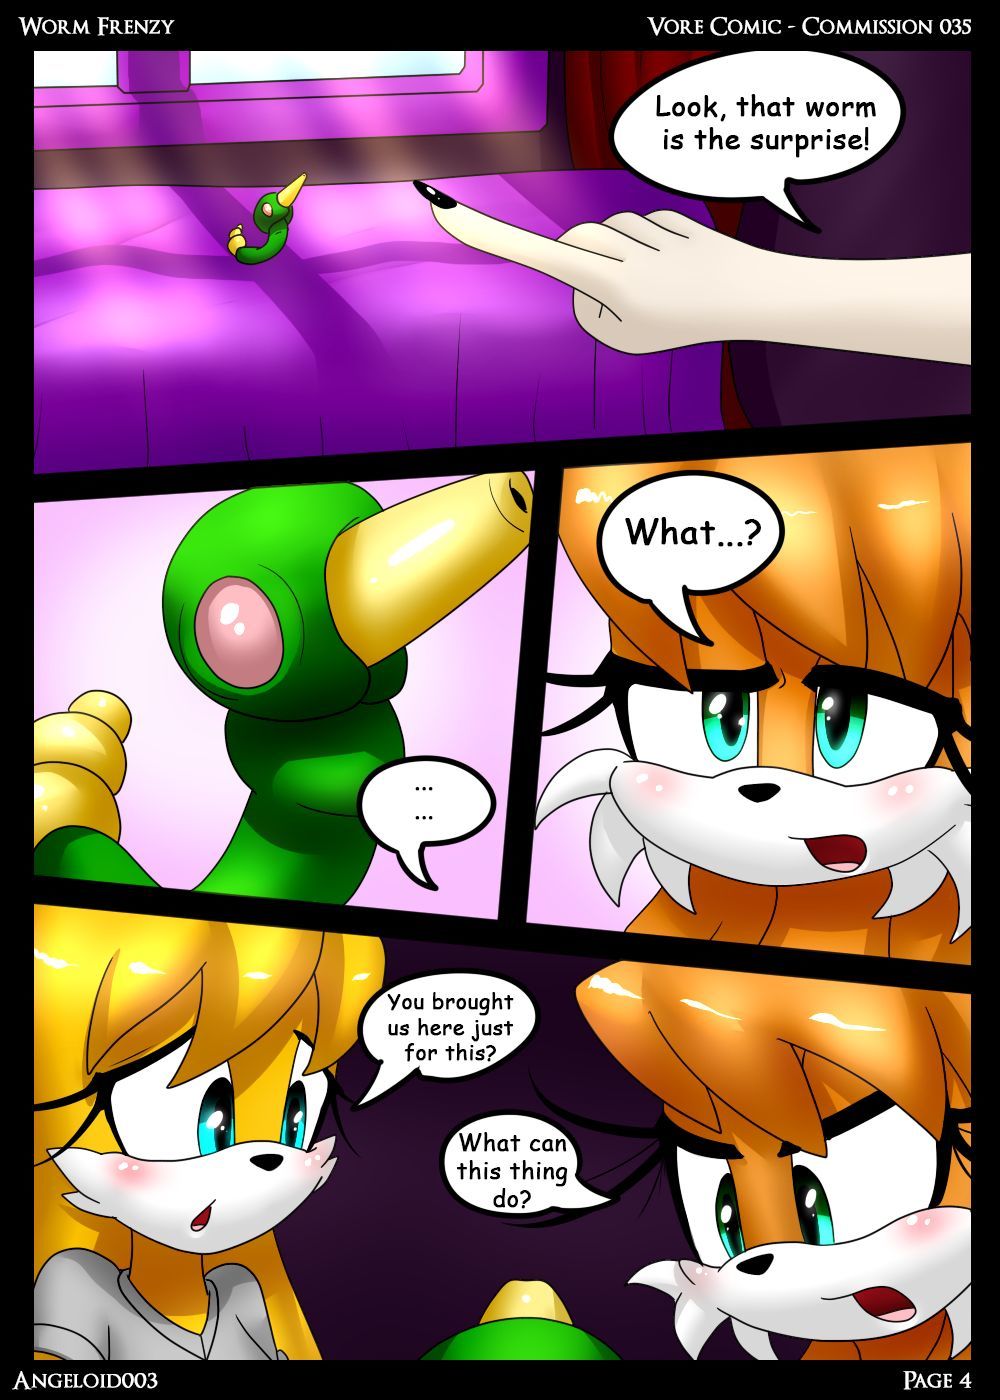 Worm Frenzy - Angeloid003 page 4